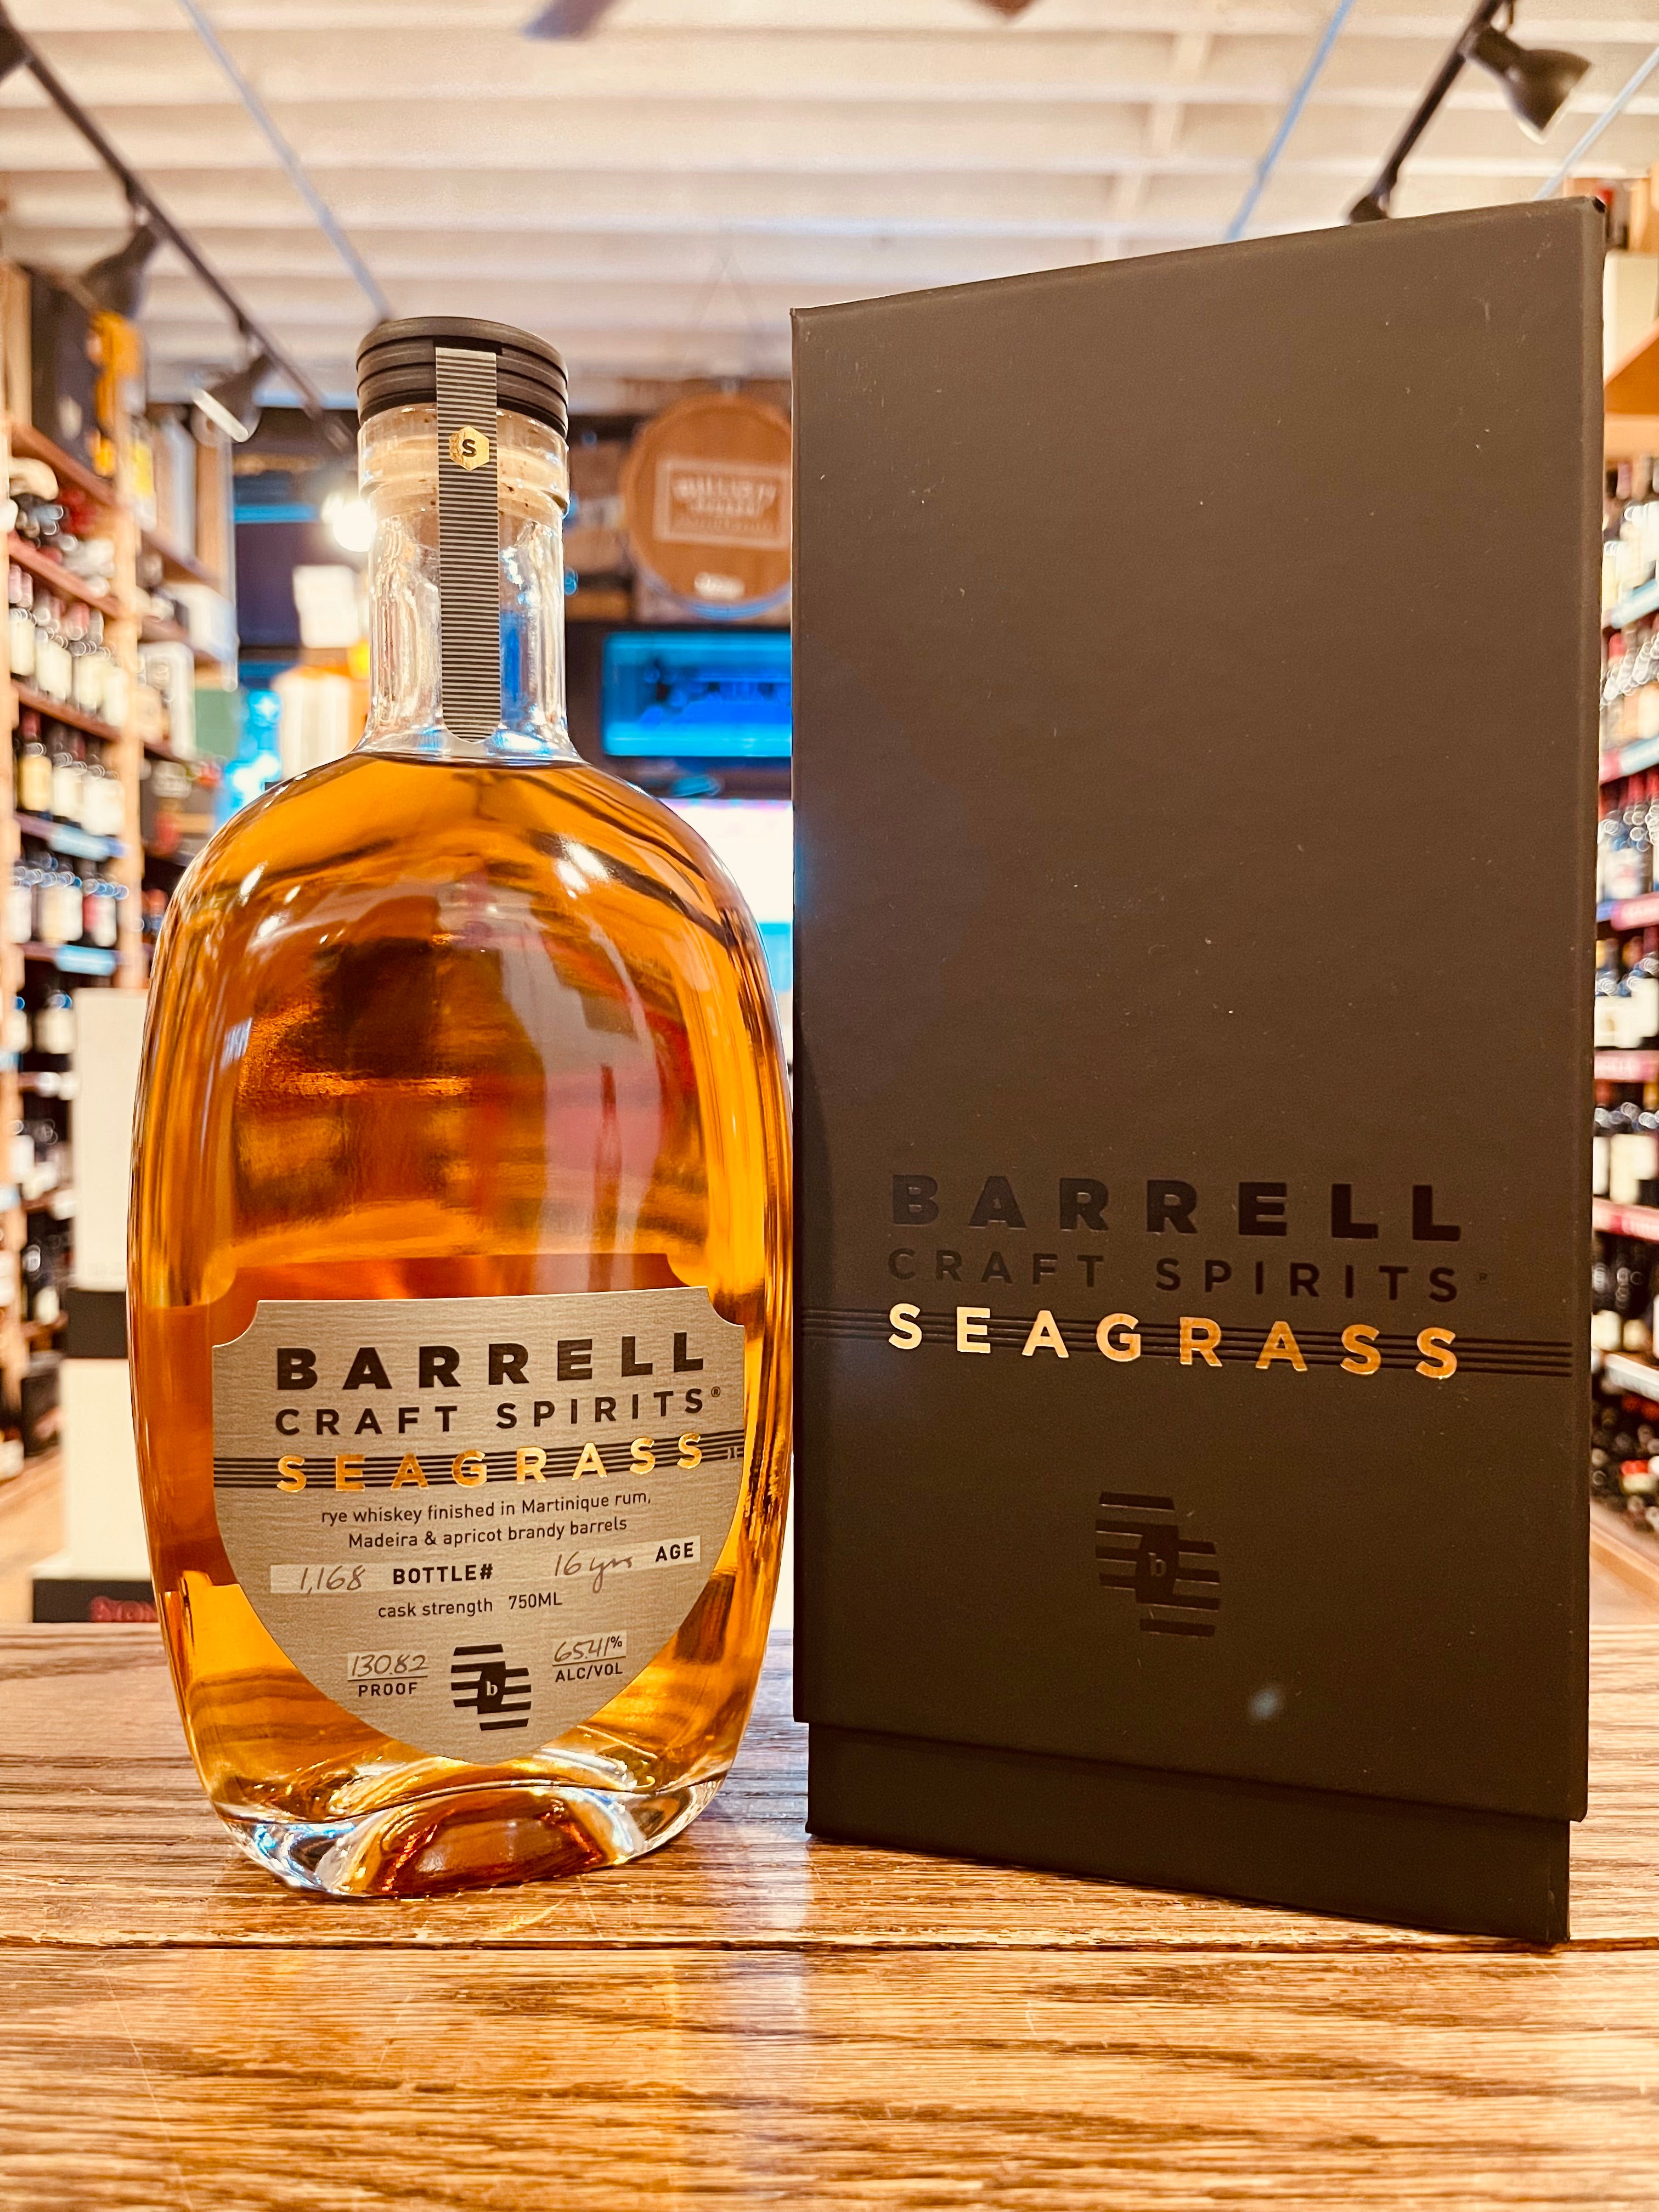 Barrell Seagrass Limited Edition 750mL